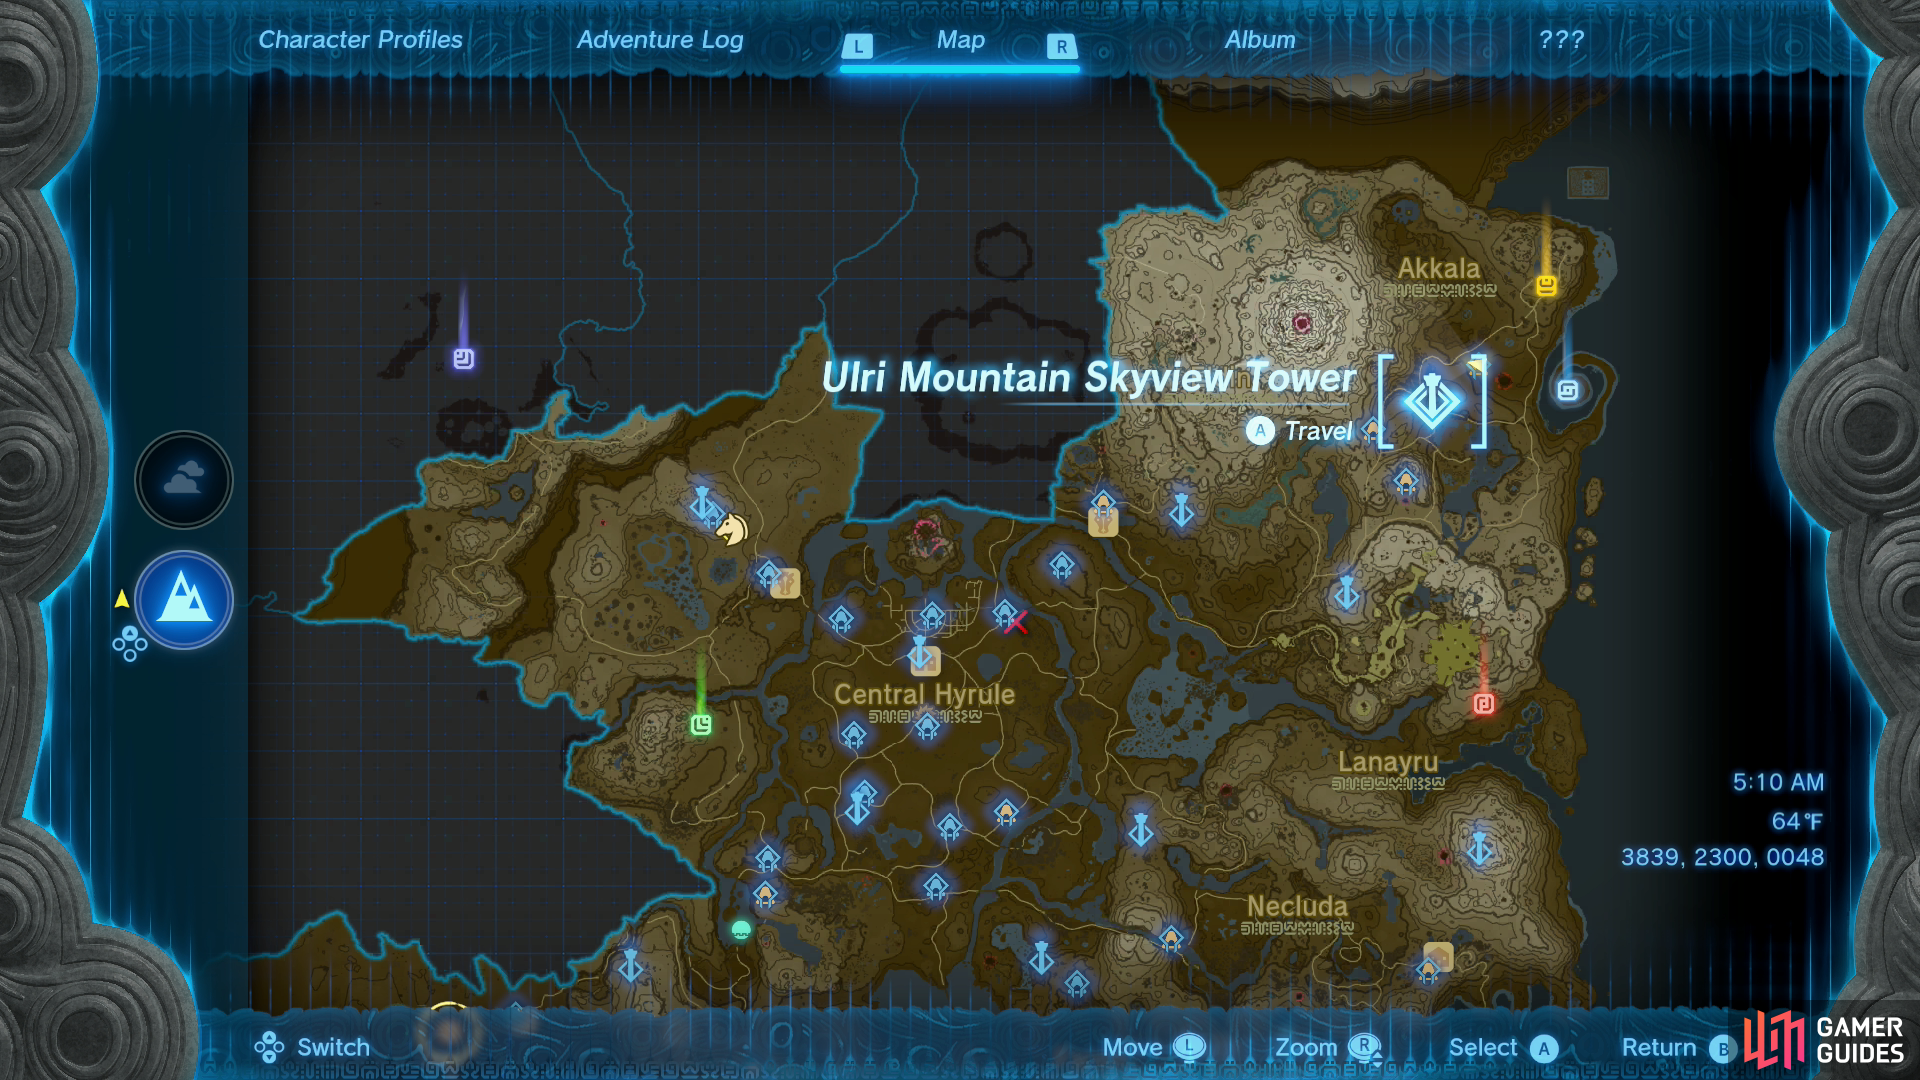 The Ulri Mountain Skyview Tower can be found in the Akkala Highlands region, in the northeastern end of Hyrule.